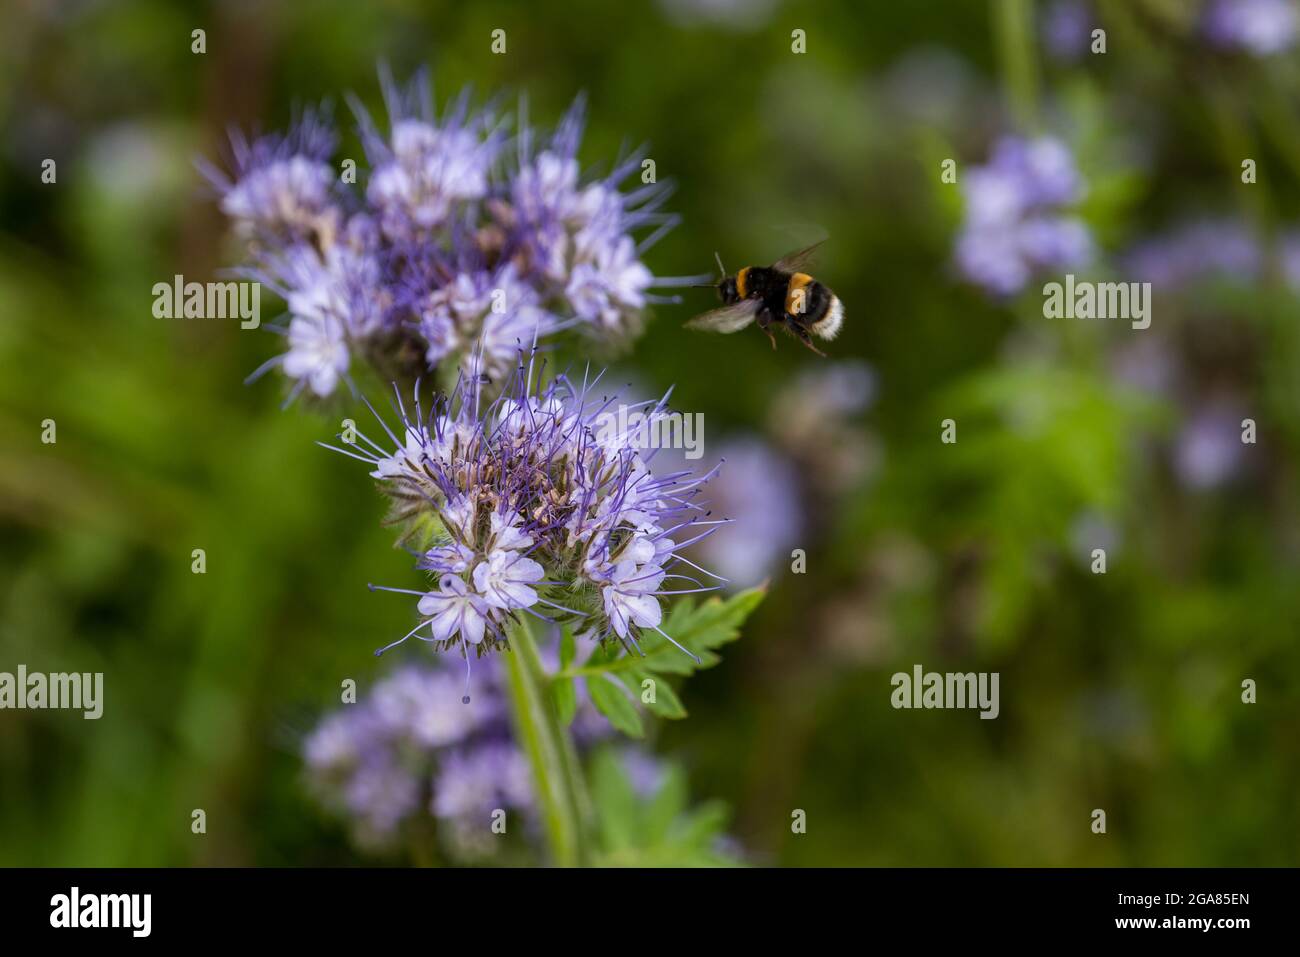 East Lothian, Scotland, United kingdom, 29th July 2021. UK Weather: sunshine on agriculture crops & bees: A crop field is edged by a cover crop of lacy phacelia (Phacelia tanacetifolia) in full bloom, also known as purple or blue tansy, which act as a pollinator attractor. The flowers are alive with buzzing bumblebees of all varieties including white-tailed bumblebees Stock Photo